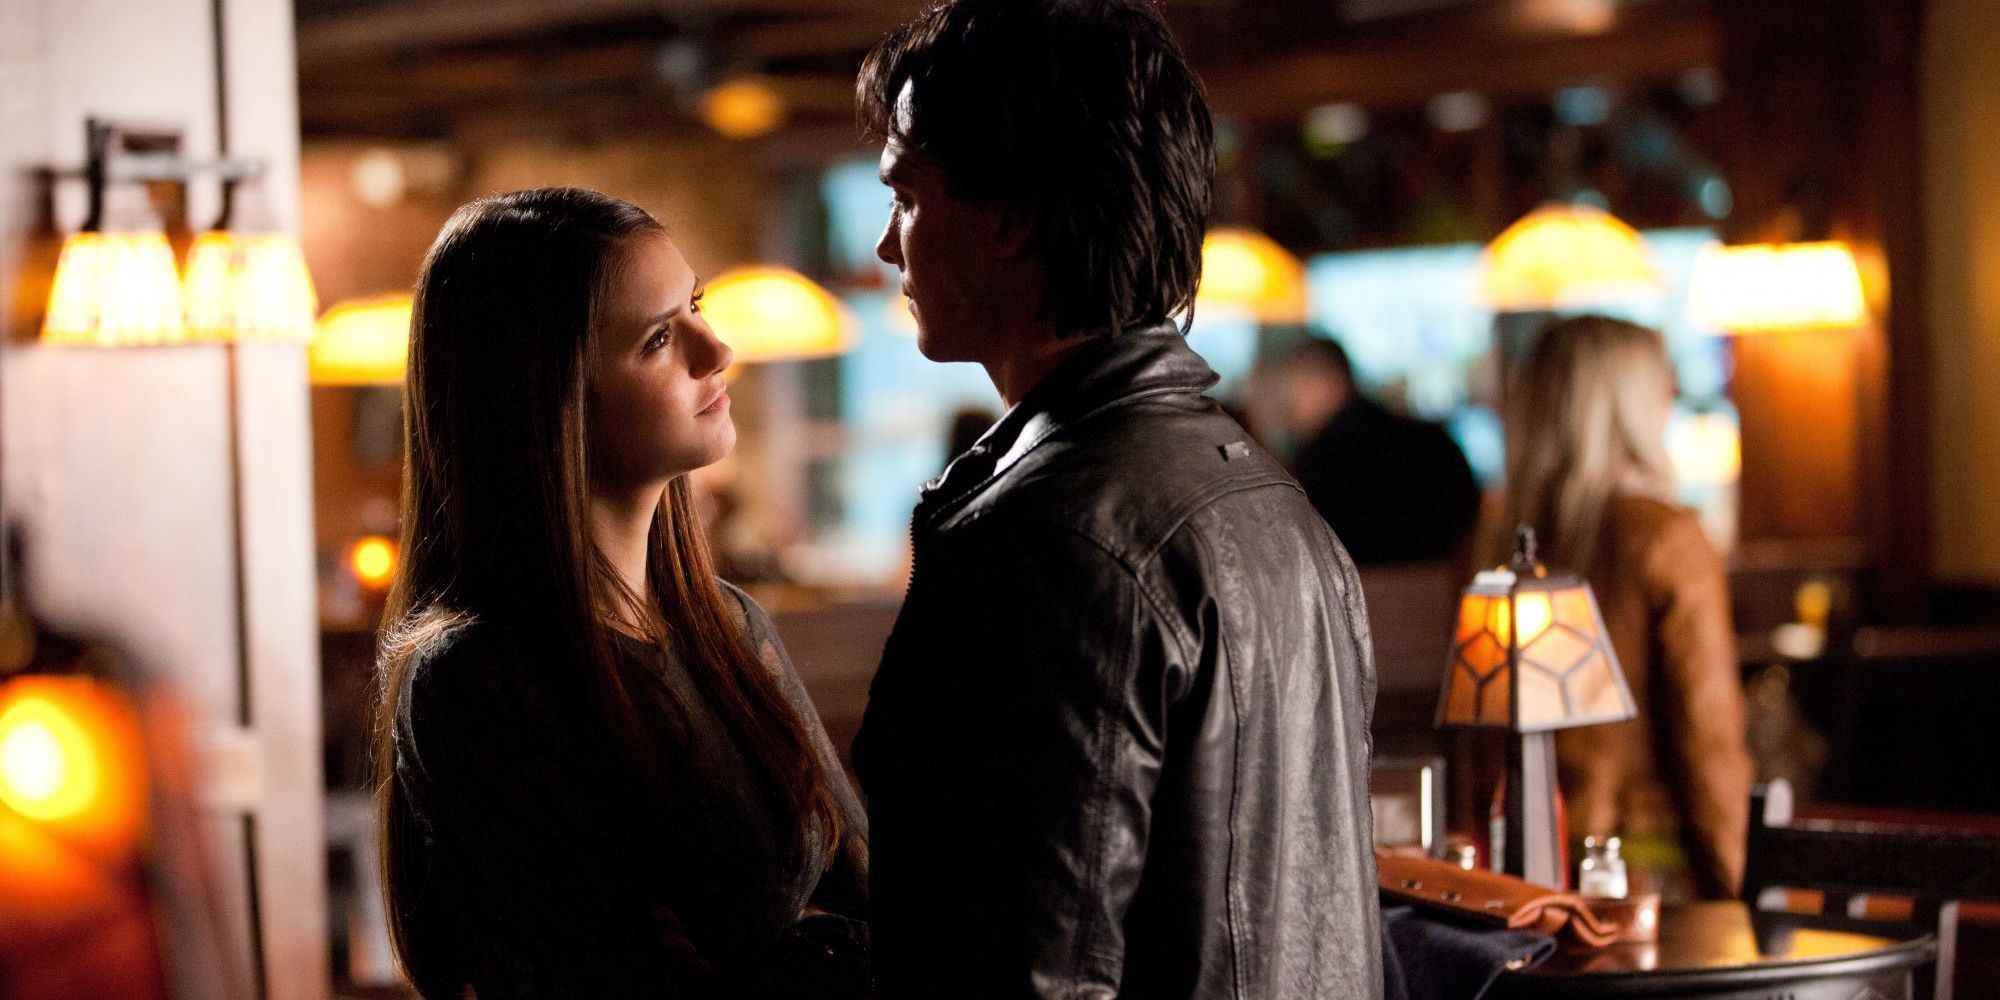 Damon and Elena talking at the bar in The Vampire Diaries.